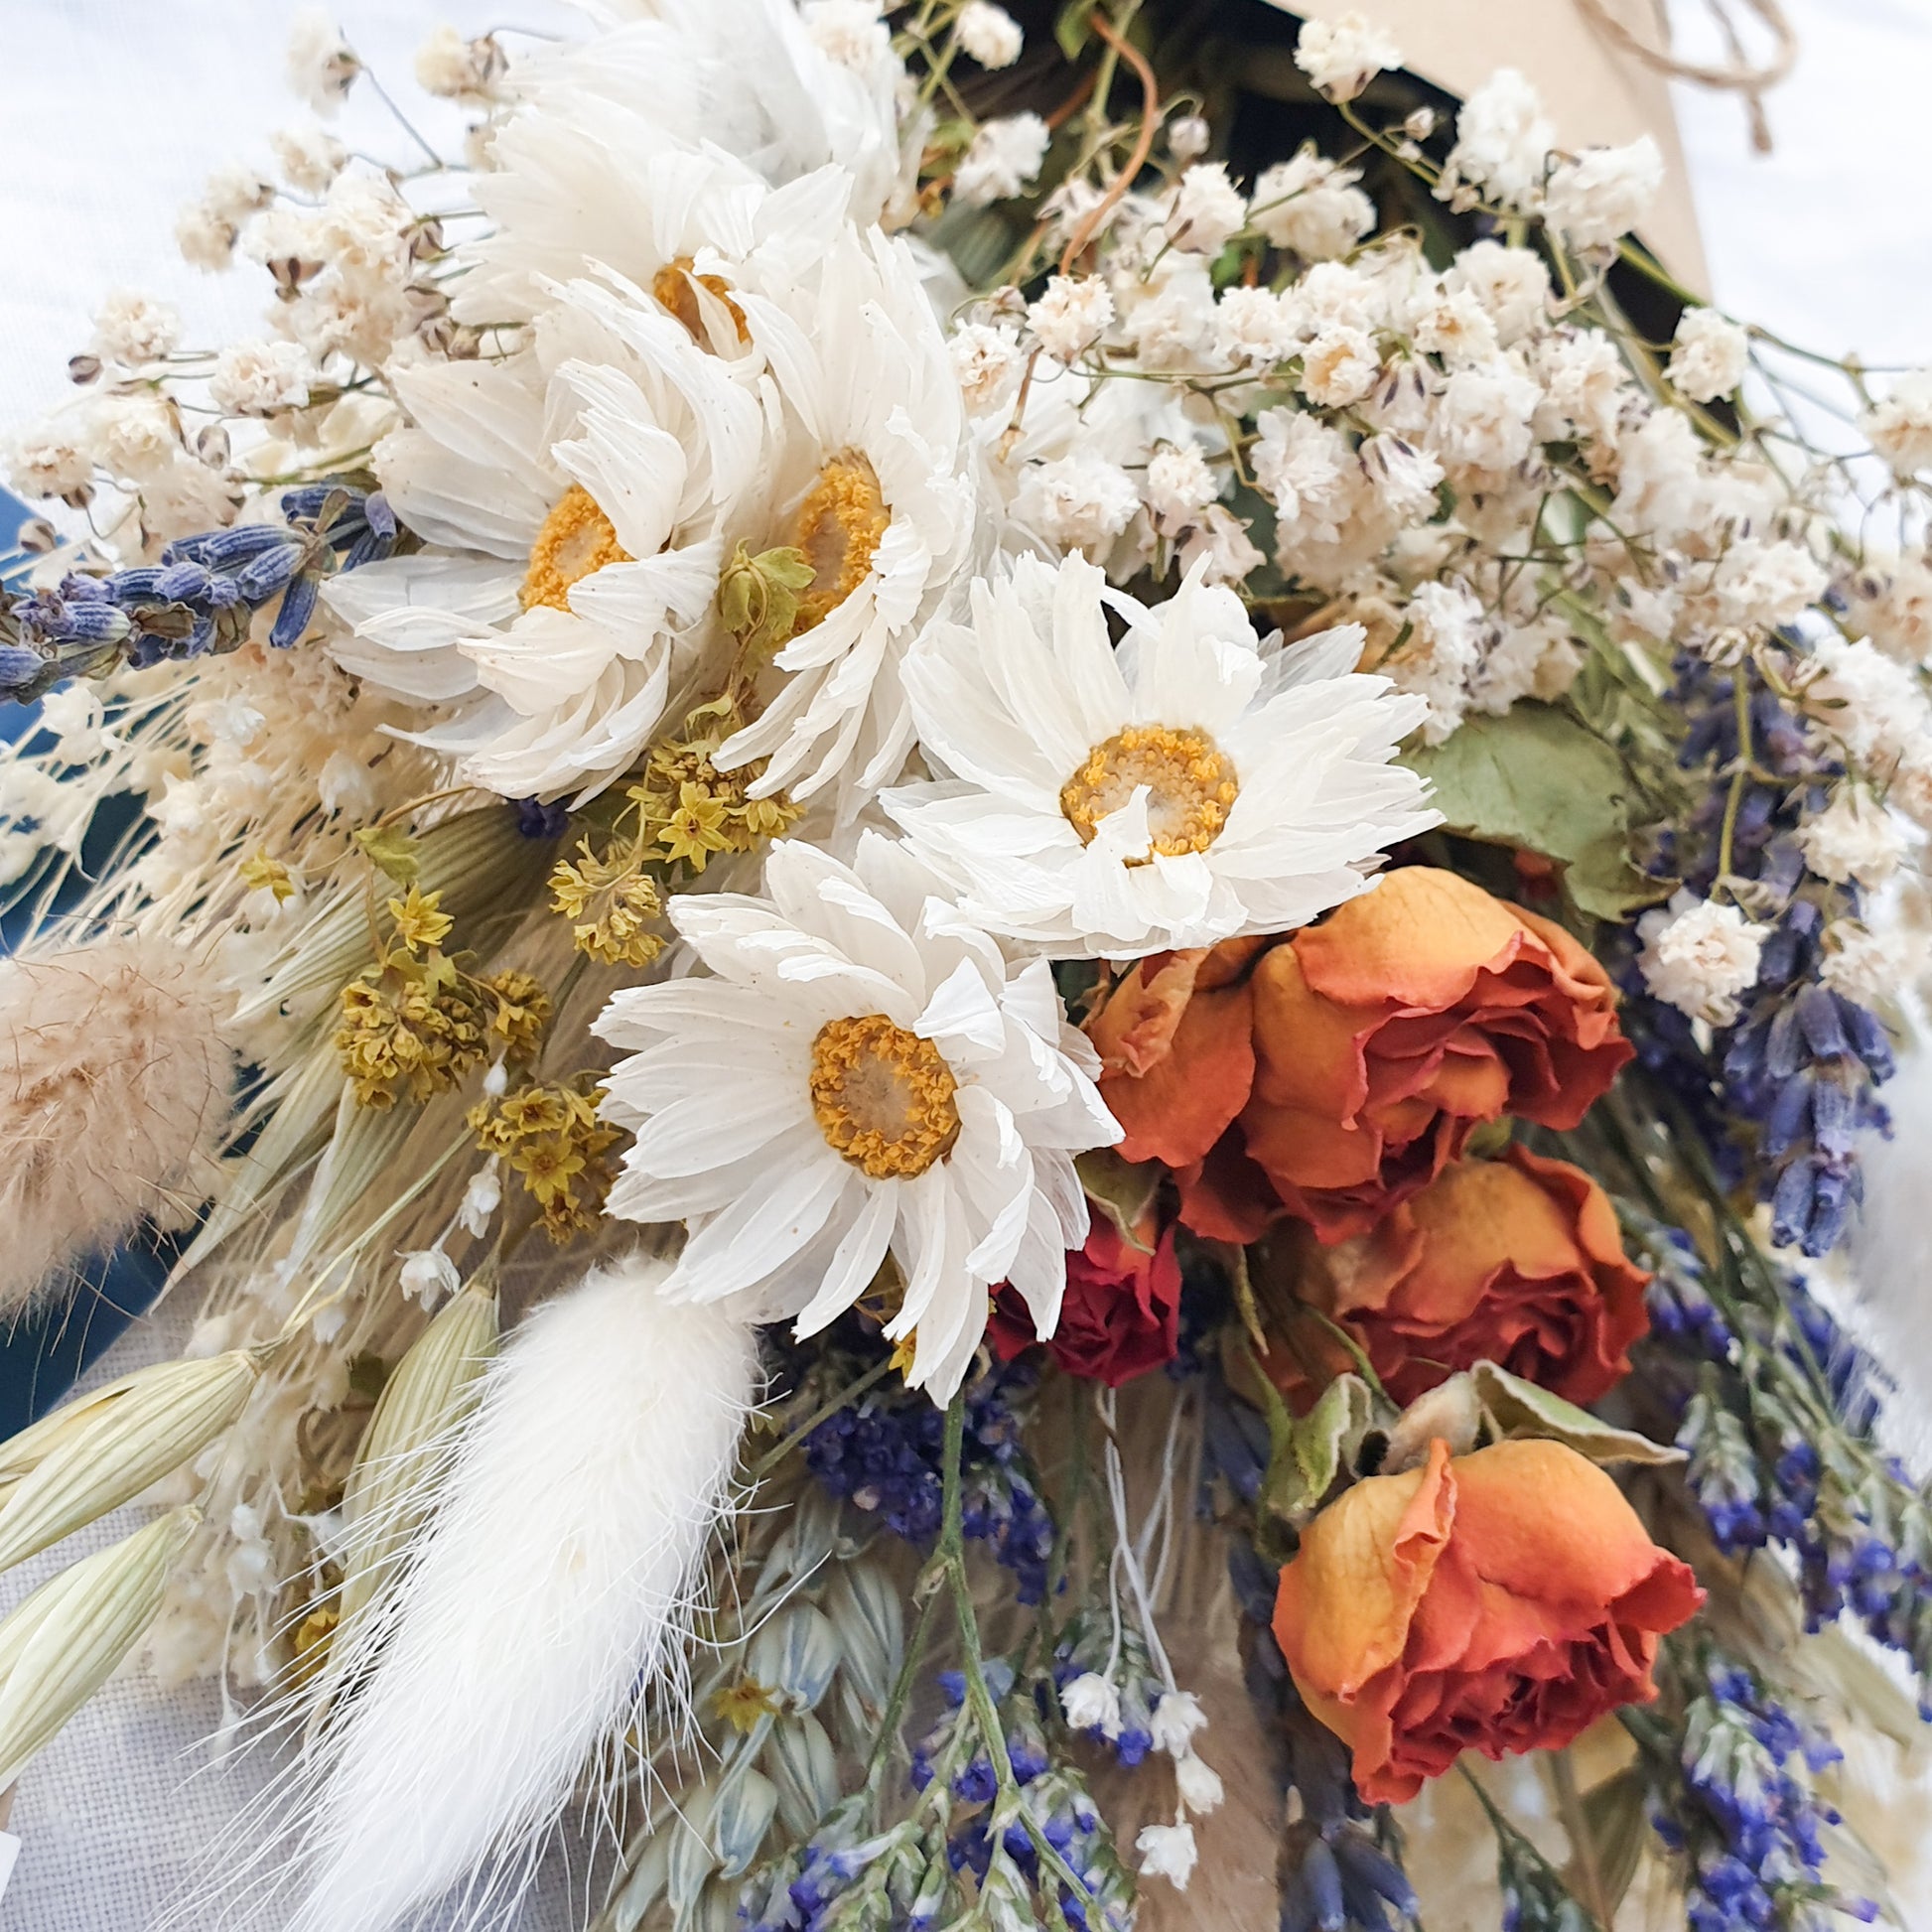 A close up of the dried flower bouquet. You can see in detail the orange spray roses, crisp white daisies with yellow centres, purple blue toned sea lavender and frothy white gypsophila among other grasses and fillers. You can see the pretty colouration of the orange roses, fading from a vibrant tomato red to orange to a golden apricot shade at the base.